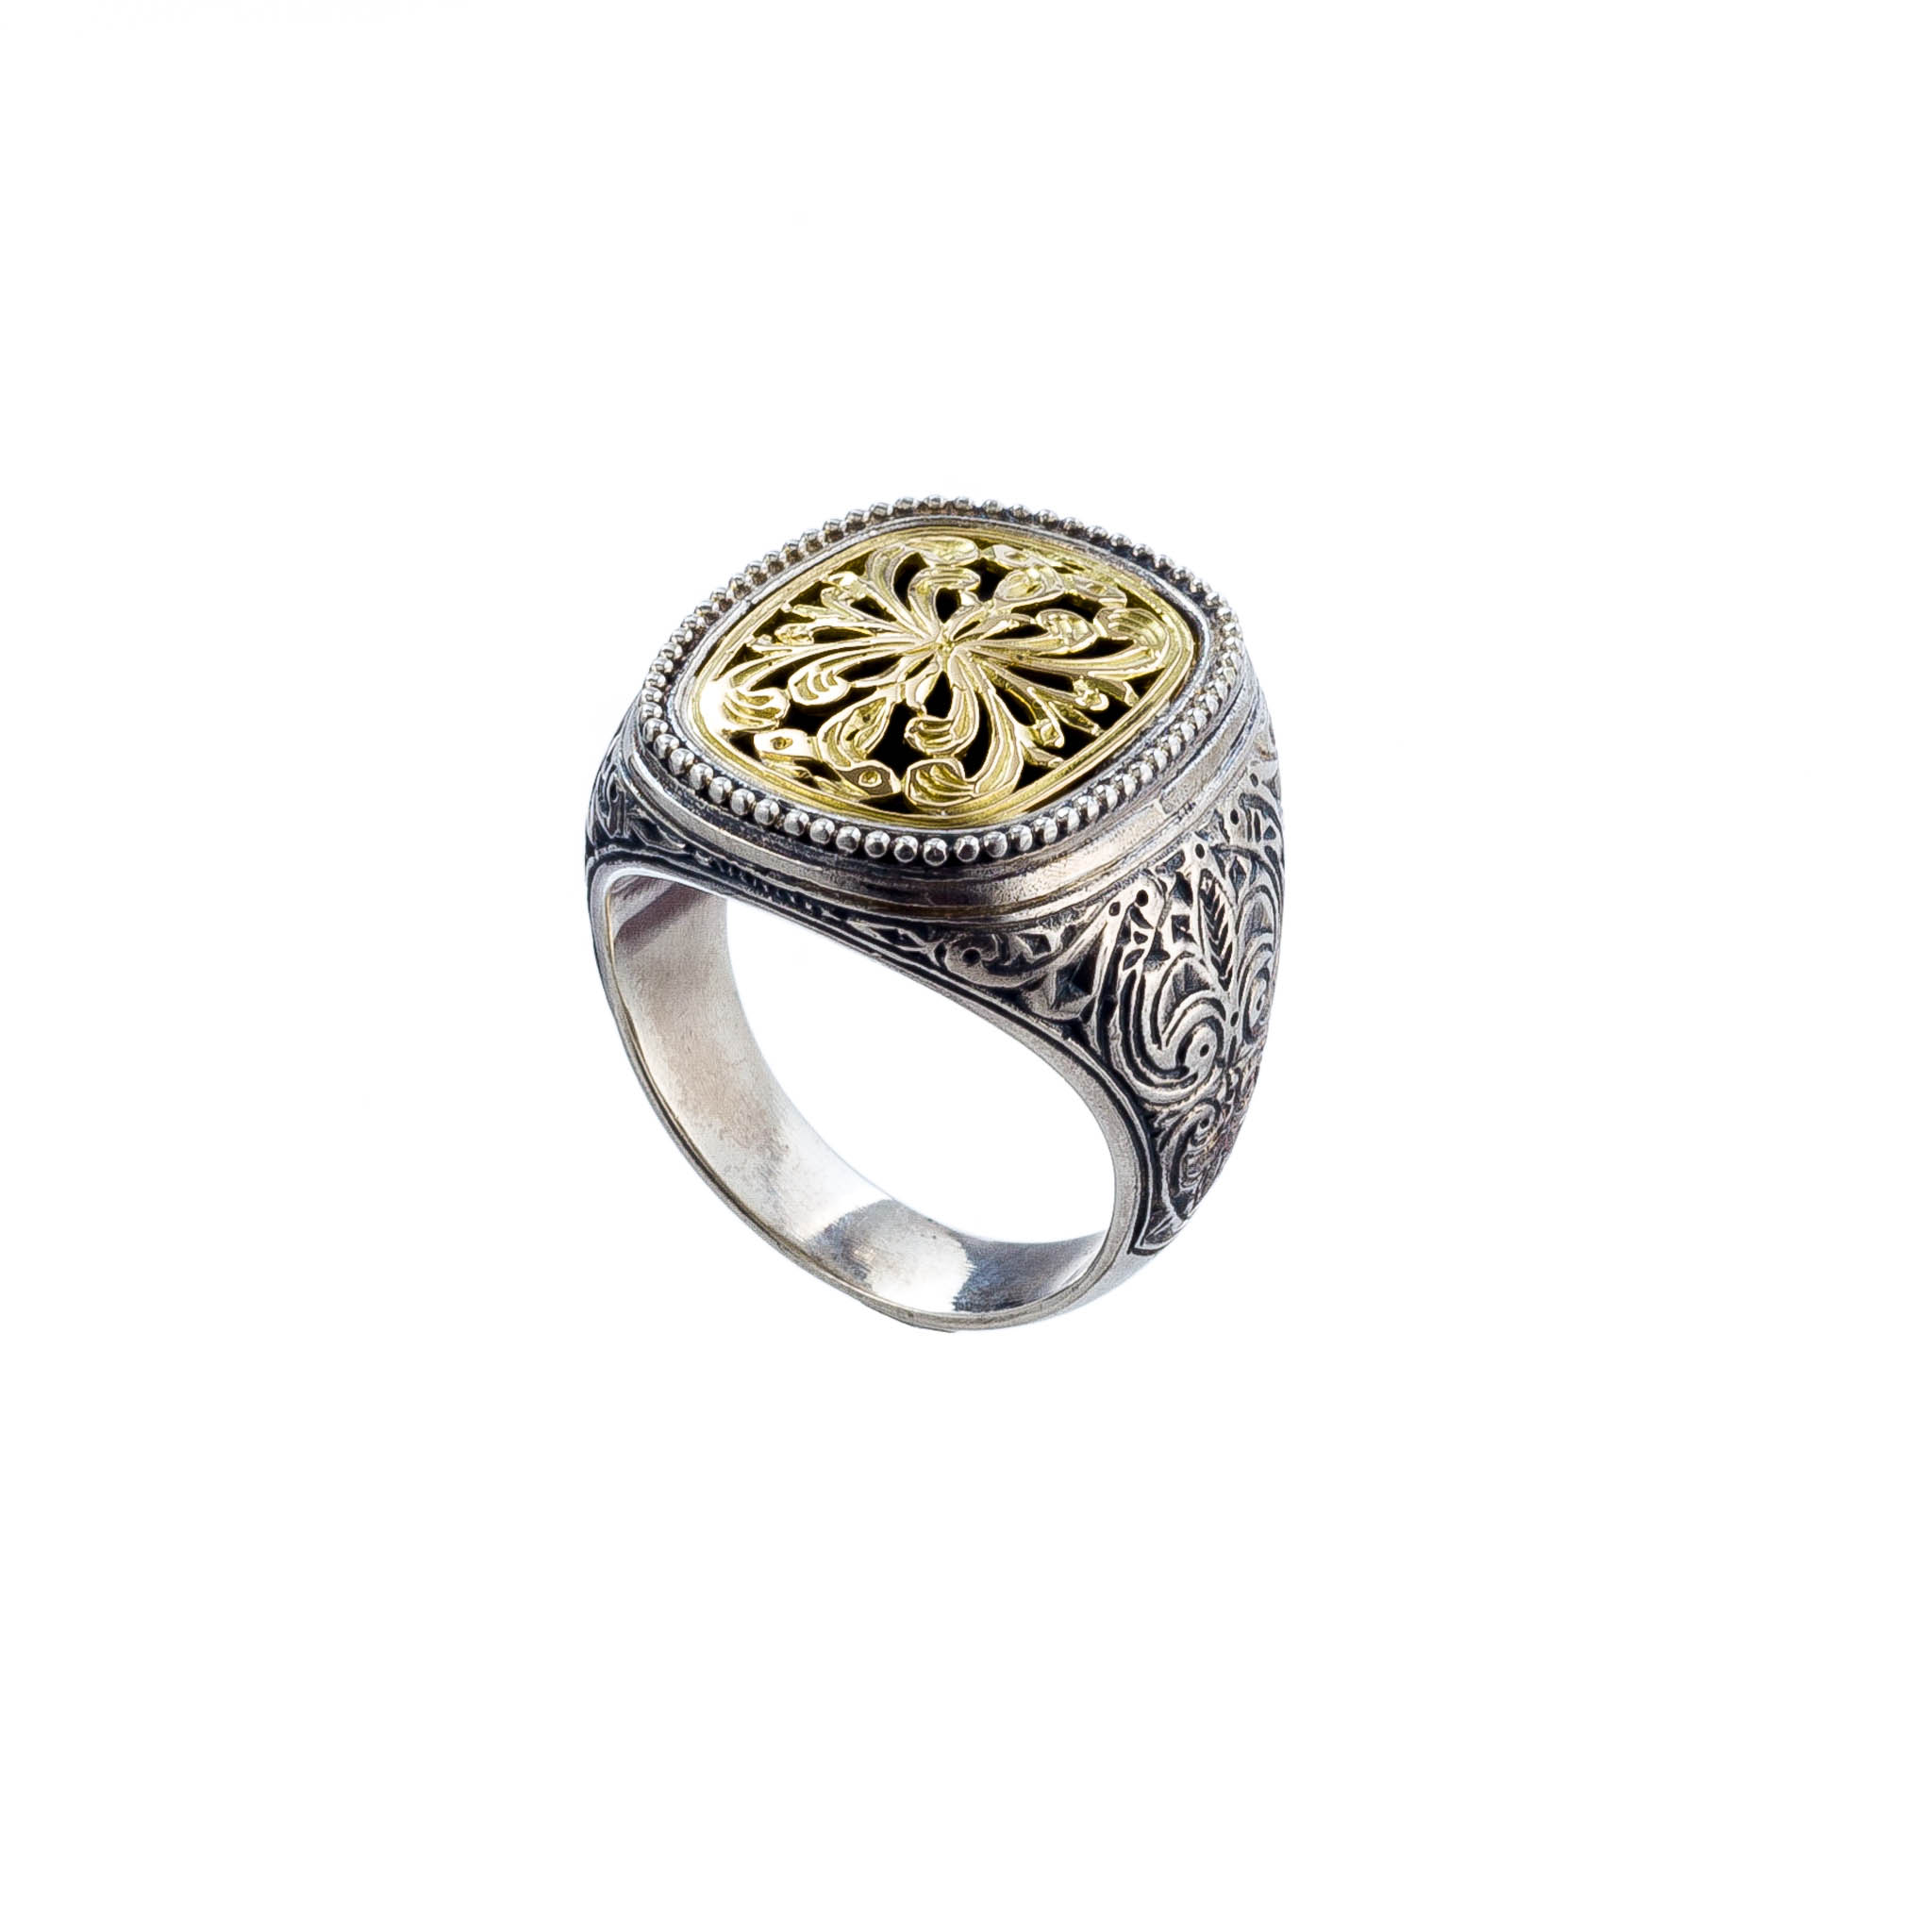 Byzantine style ring in 18K Gold and sterling silver